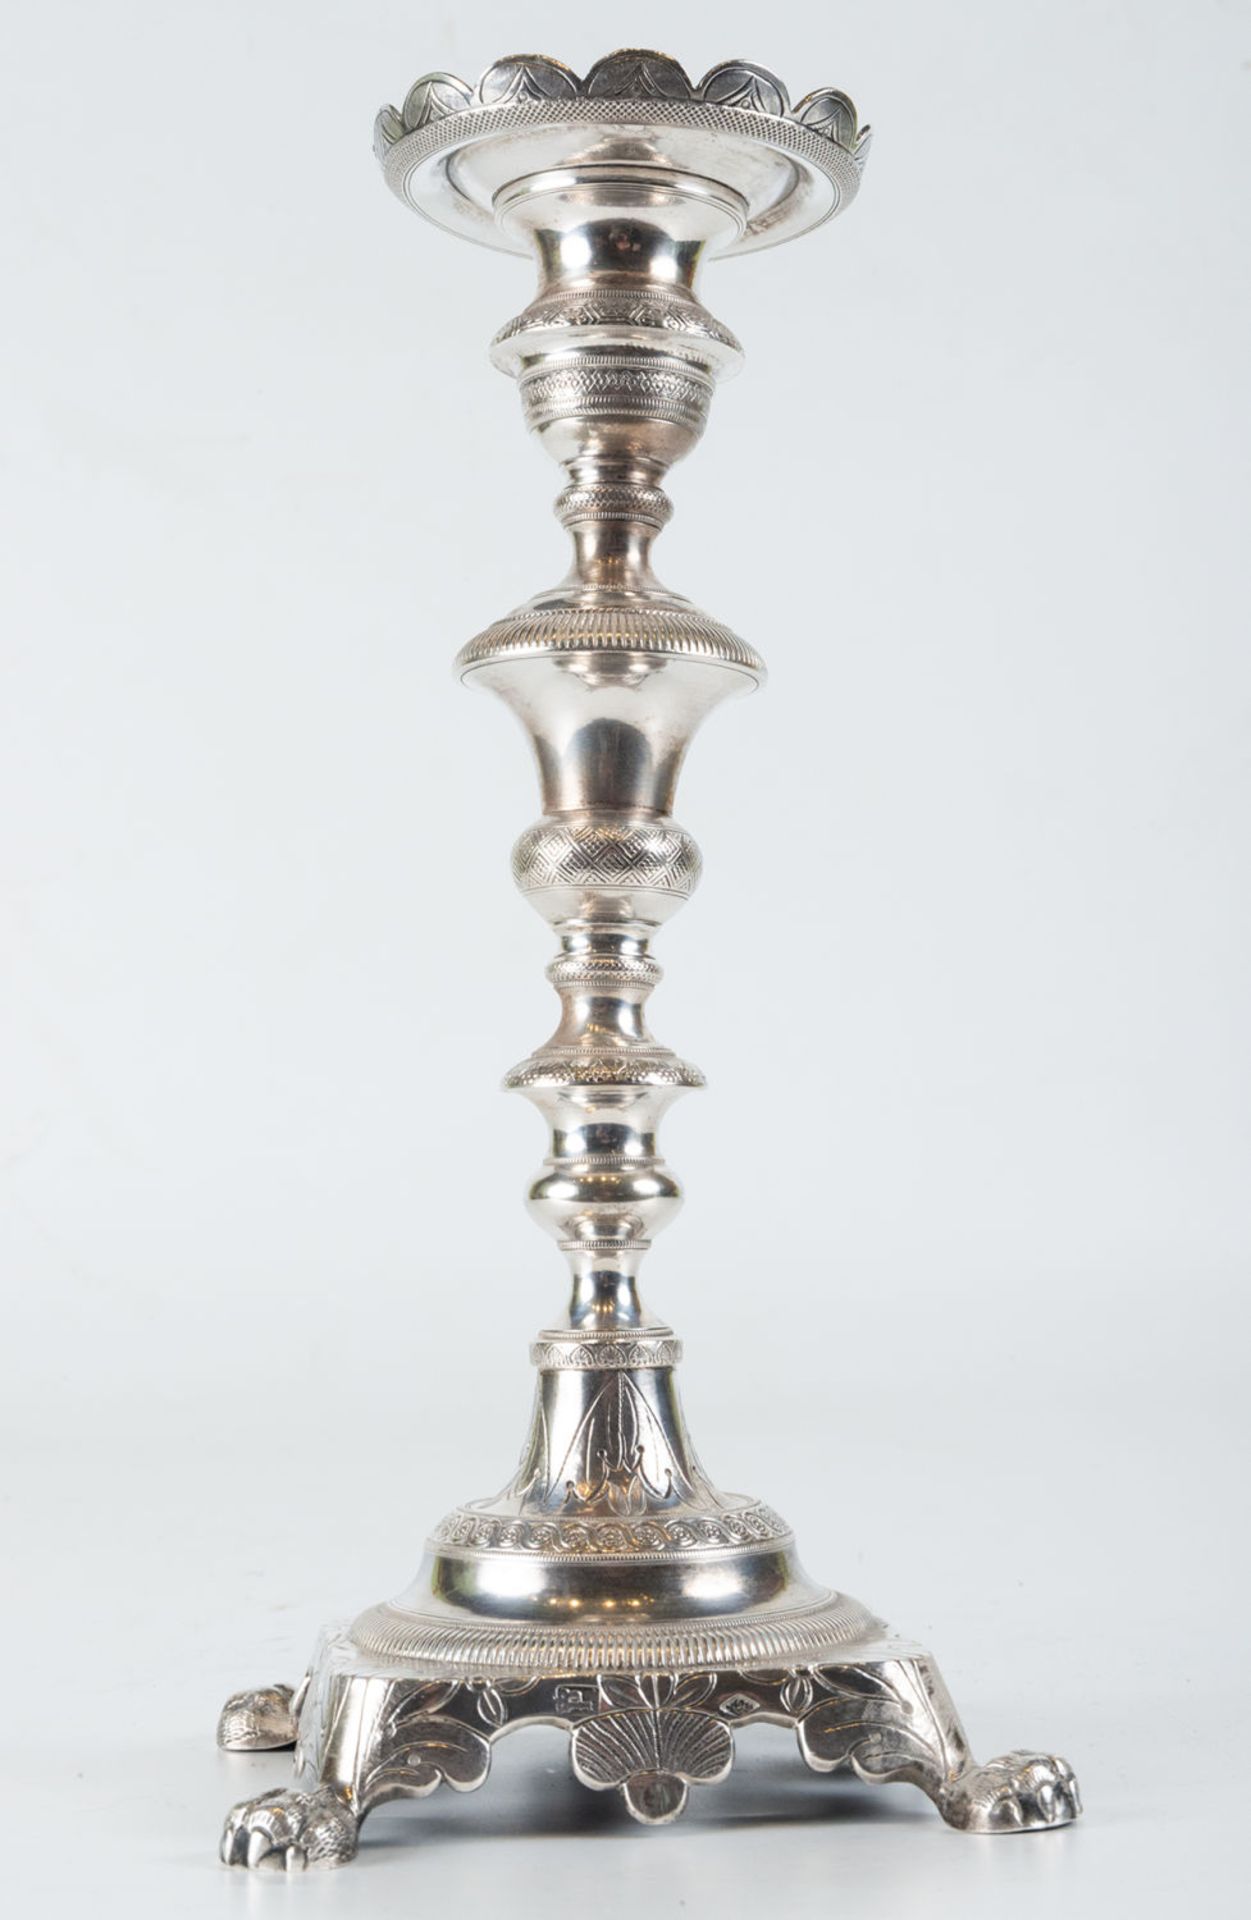 Pair of solid sterling silver candlesticks, 19th century - Image 3 of 9